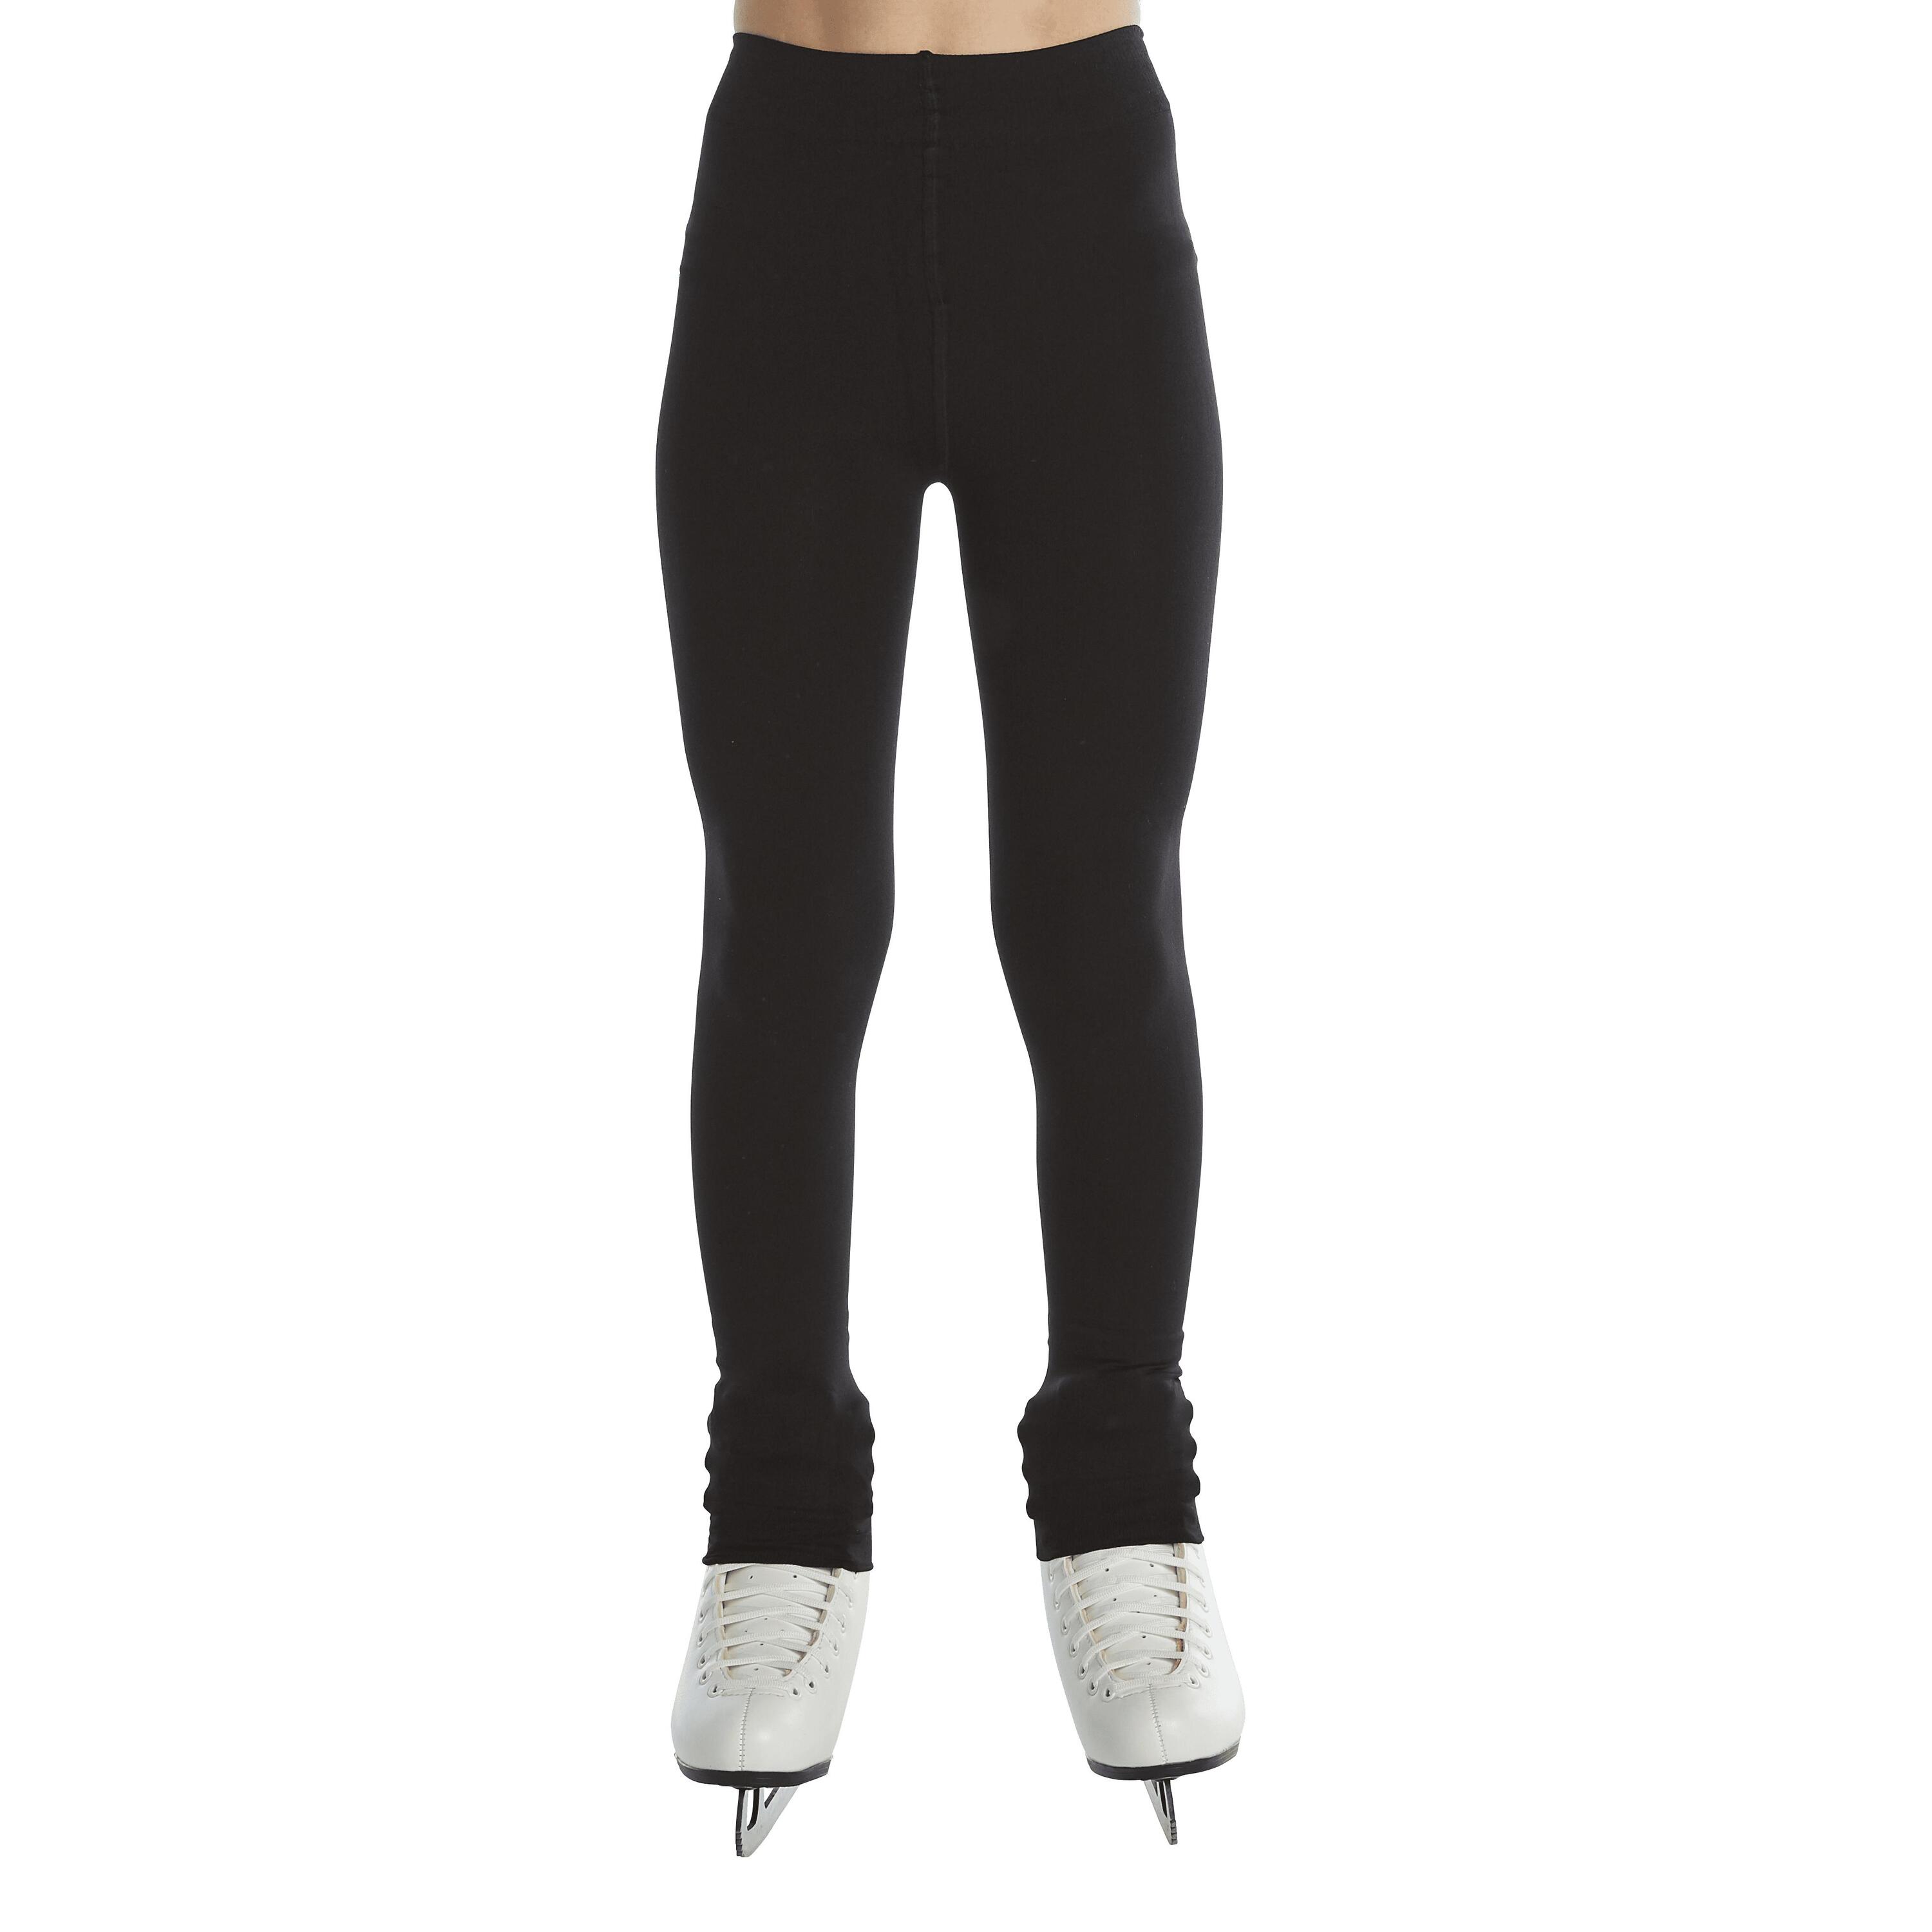  Ice Skating Pants for Girls 5-6 Years Old Pure Black